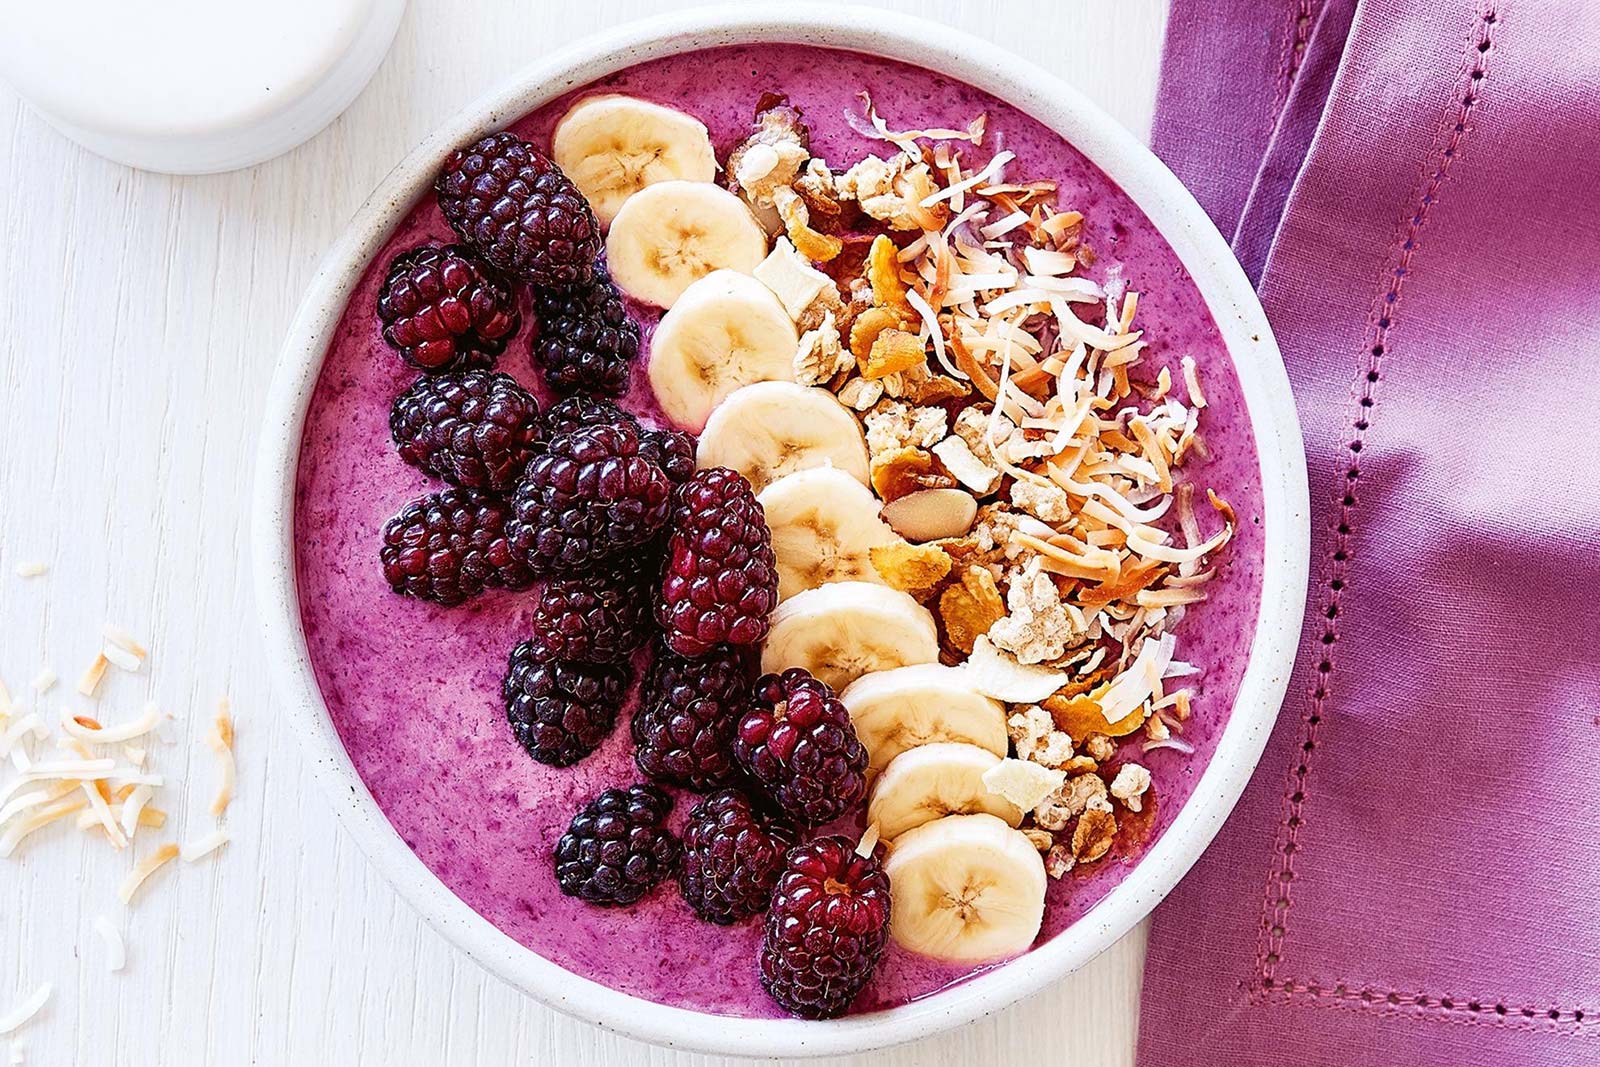 Only a Truly Cool Person Will Have Eaten at Least 13/25 of These Foods Smoothie Bowl1